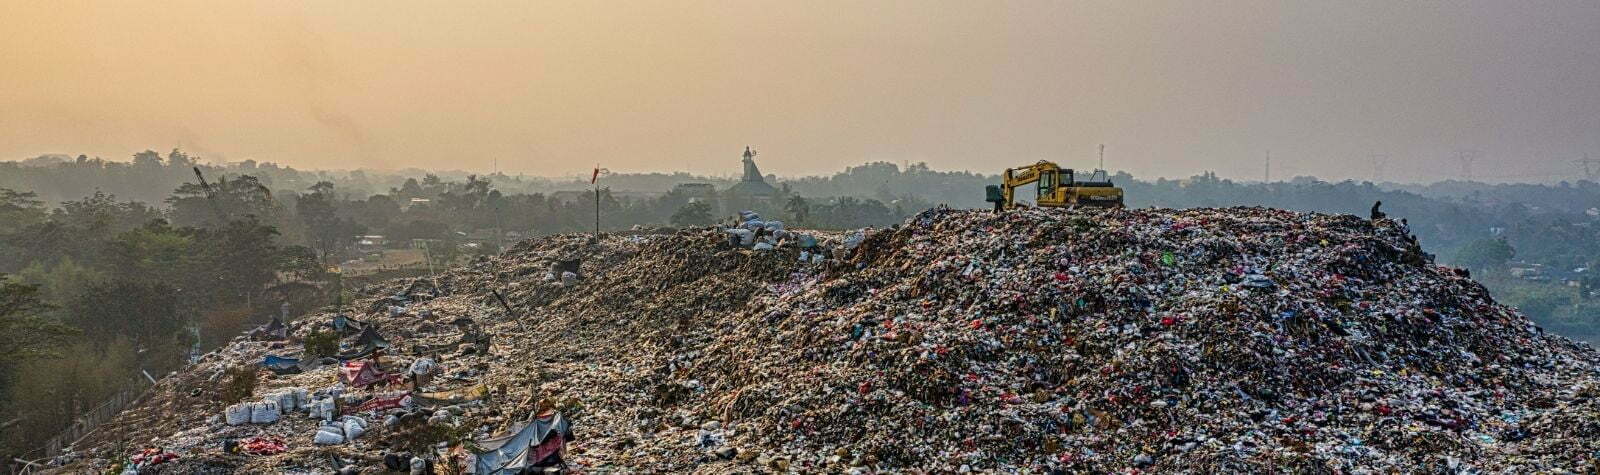 The great Indian landfill